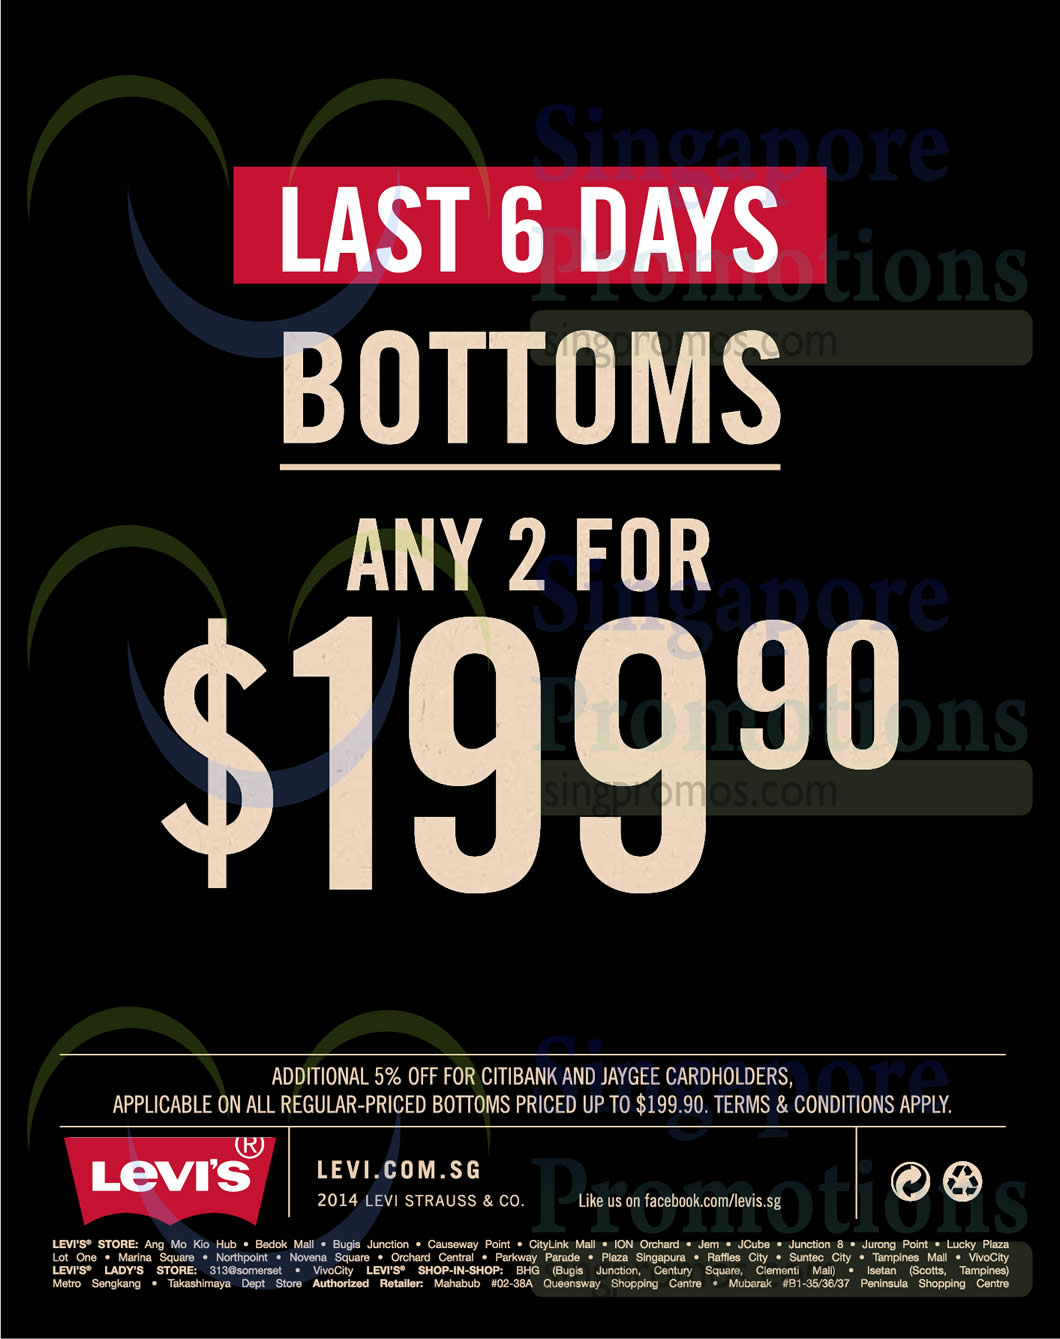 Featured image for Levi's Any 2 Bottoms For $199.90 29 Aug - 22 Oct 2014